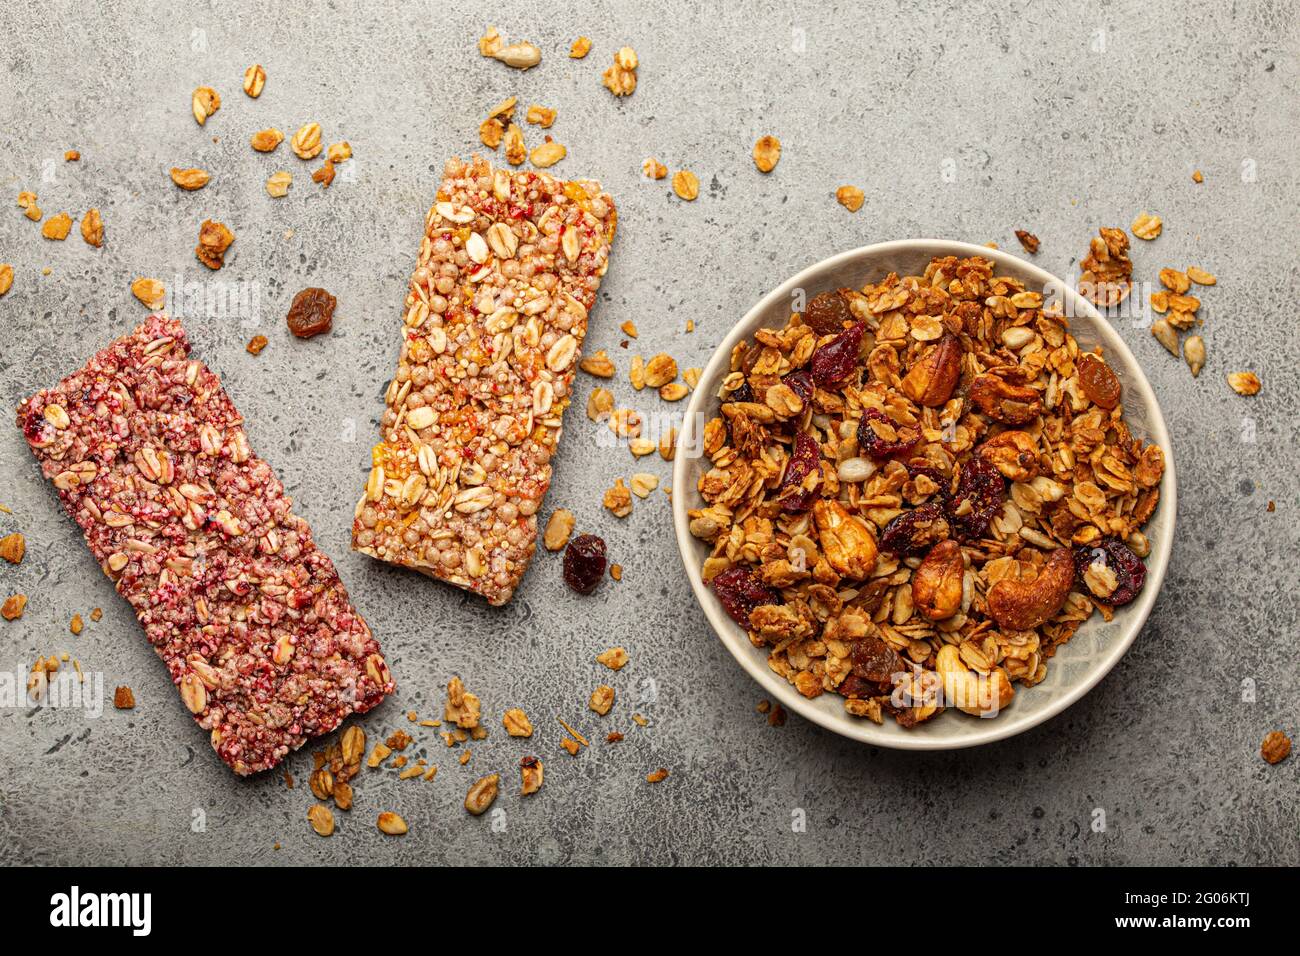 Healthy cereal granola bars from above Stock Photo